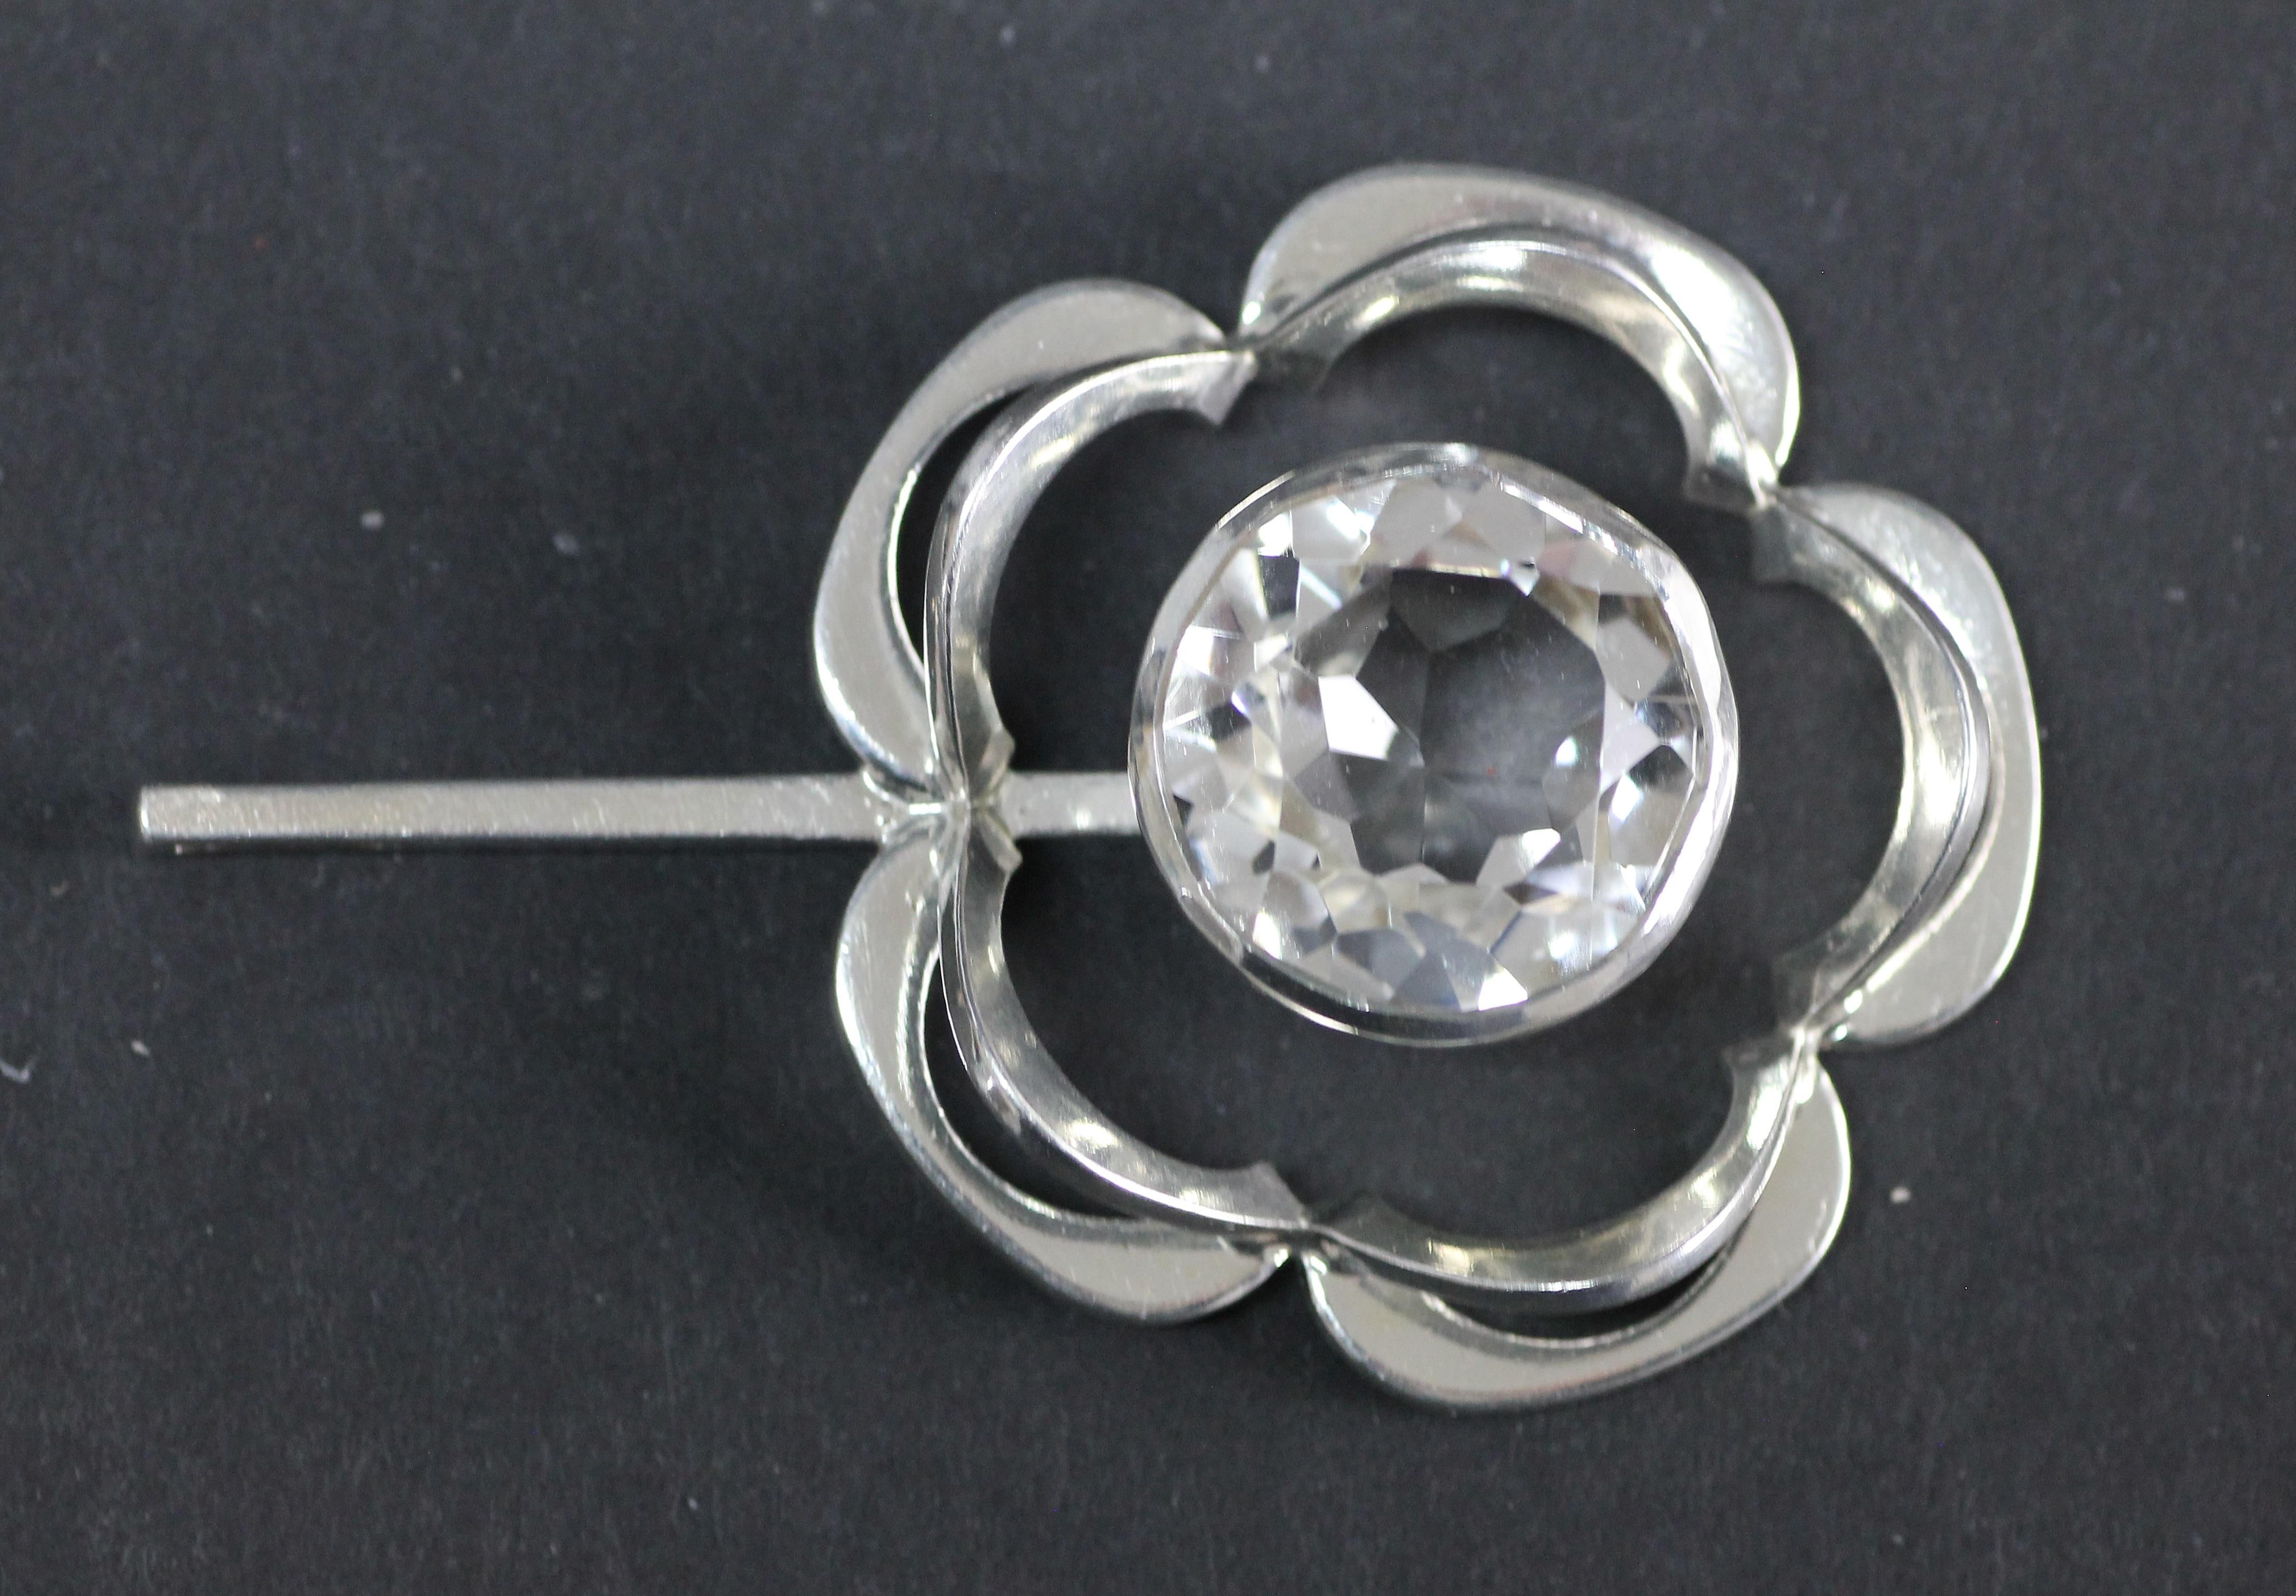 Swedish Modernist Pendant, Alton 1949, Sterling Silver and a Large Rock Crystal 5